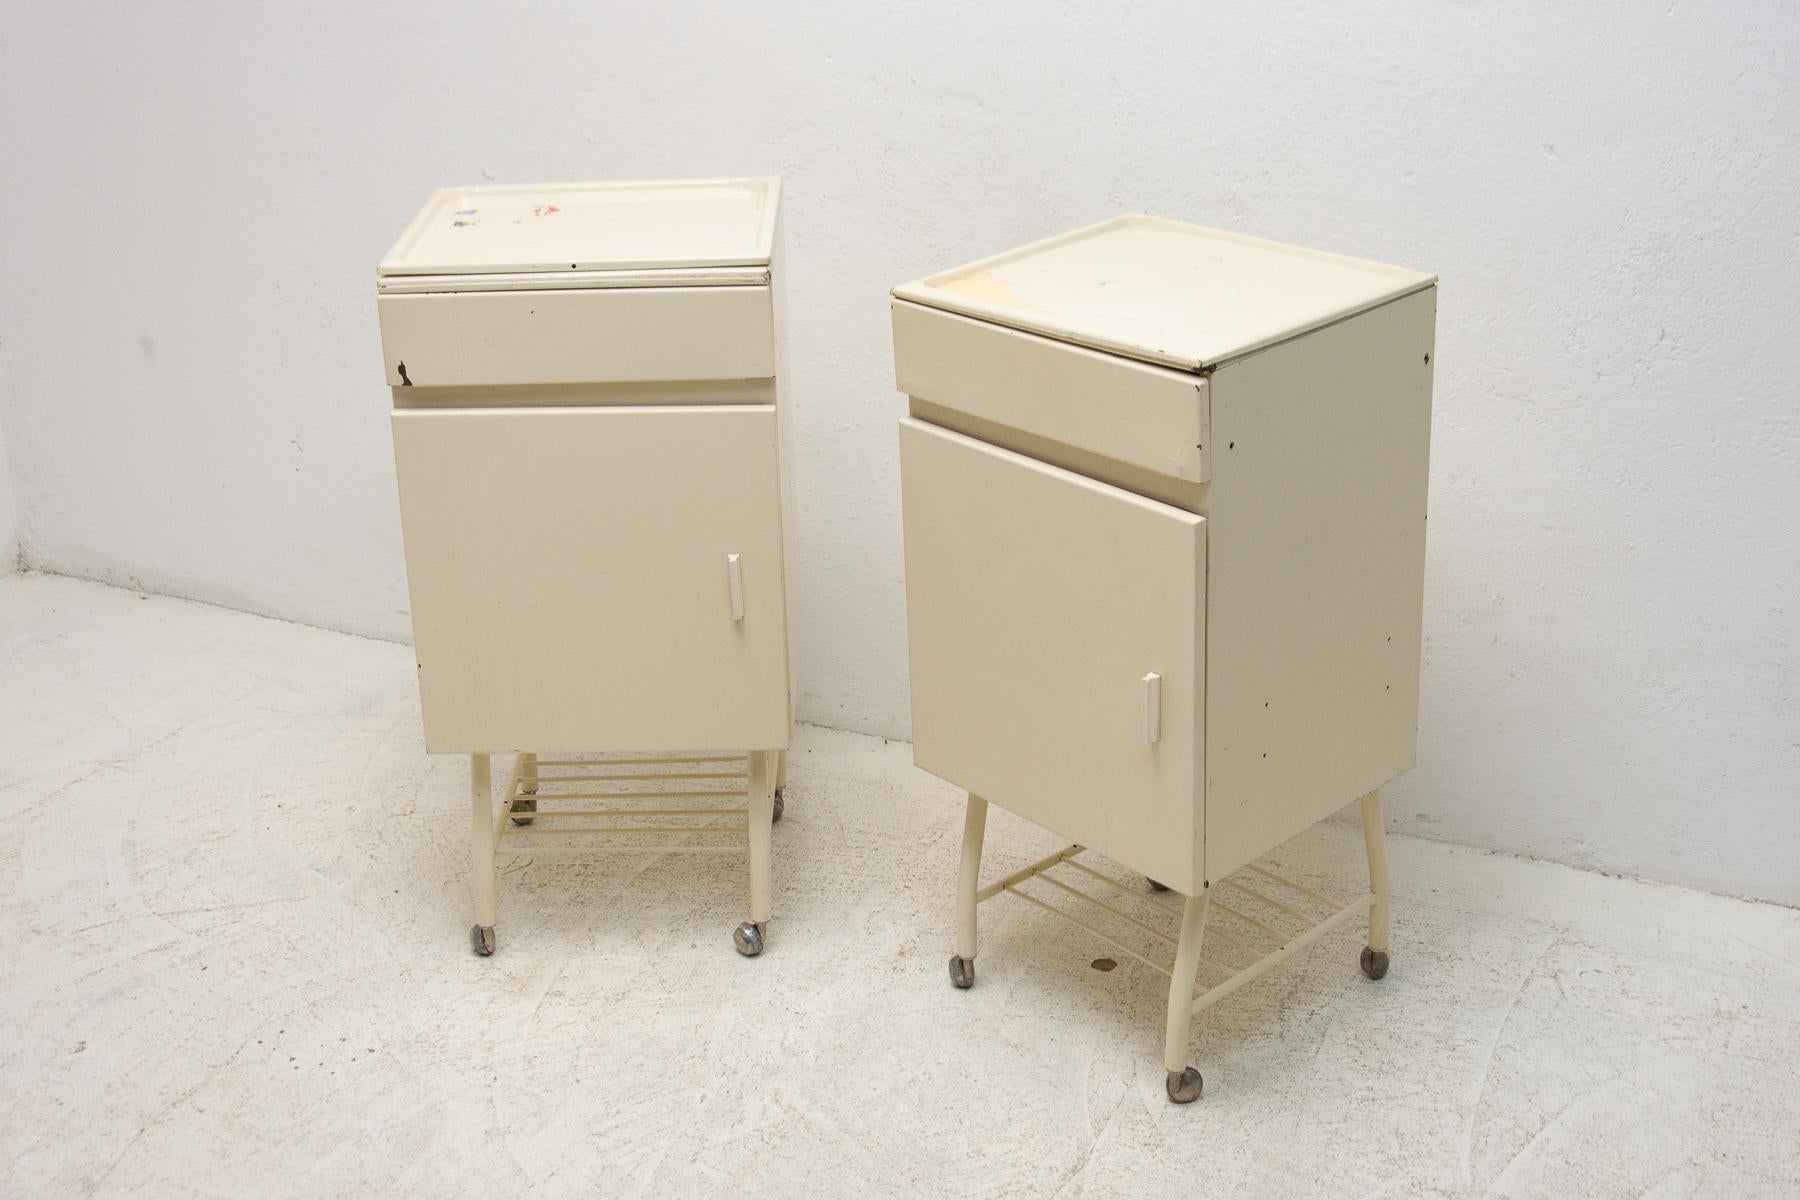 Pair of Tin Industrial Bedside Tables, 1970s, Czechoslovakia In Good Condition For Sale In Prague 8, CZ